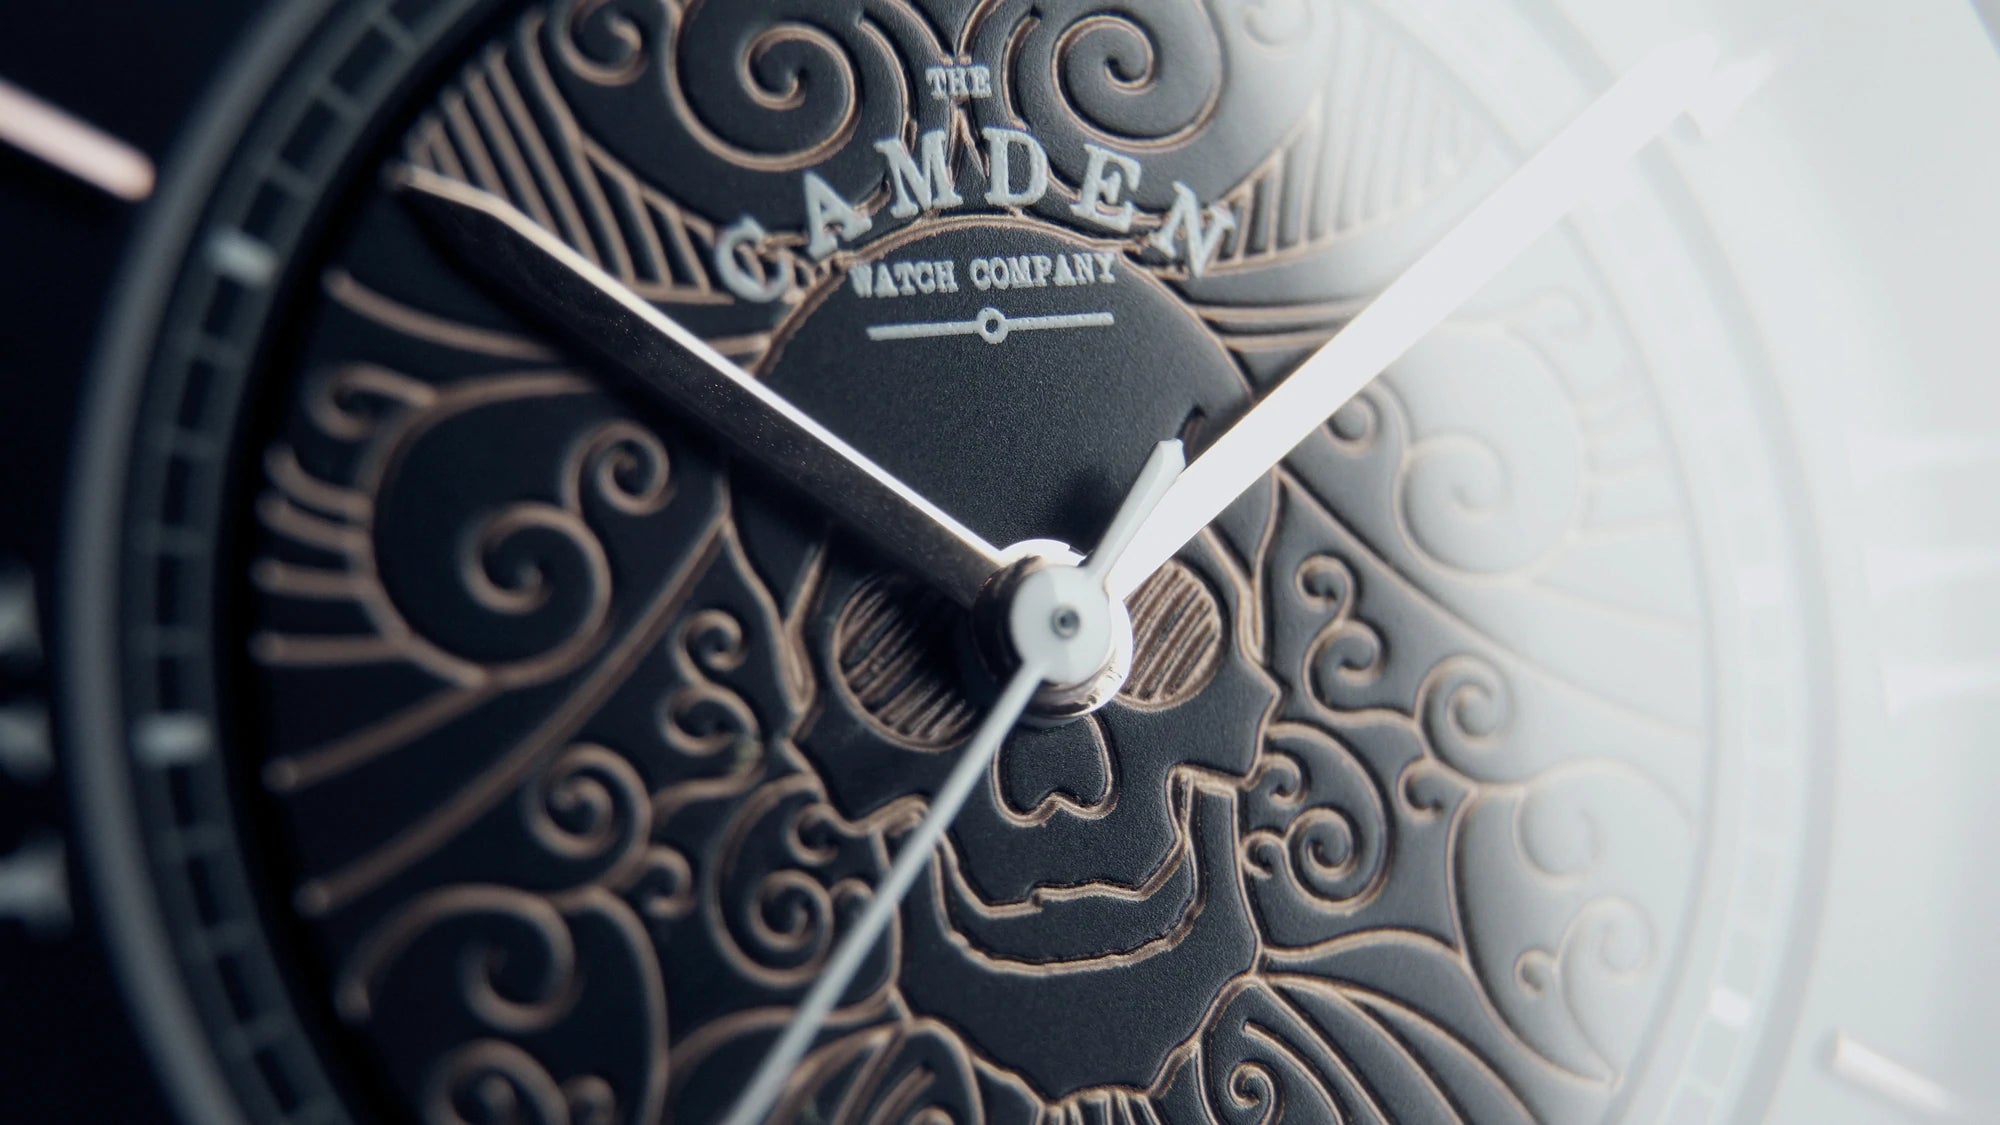 Memento Mori Watches by The Camden Watch Company